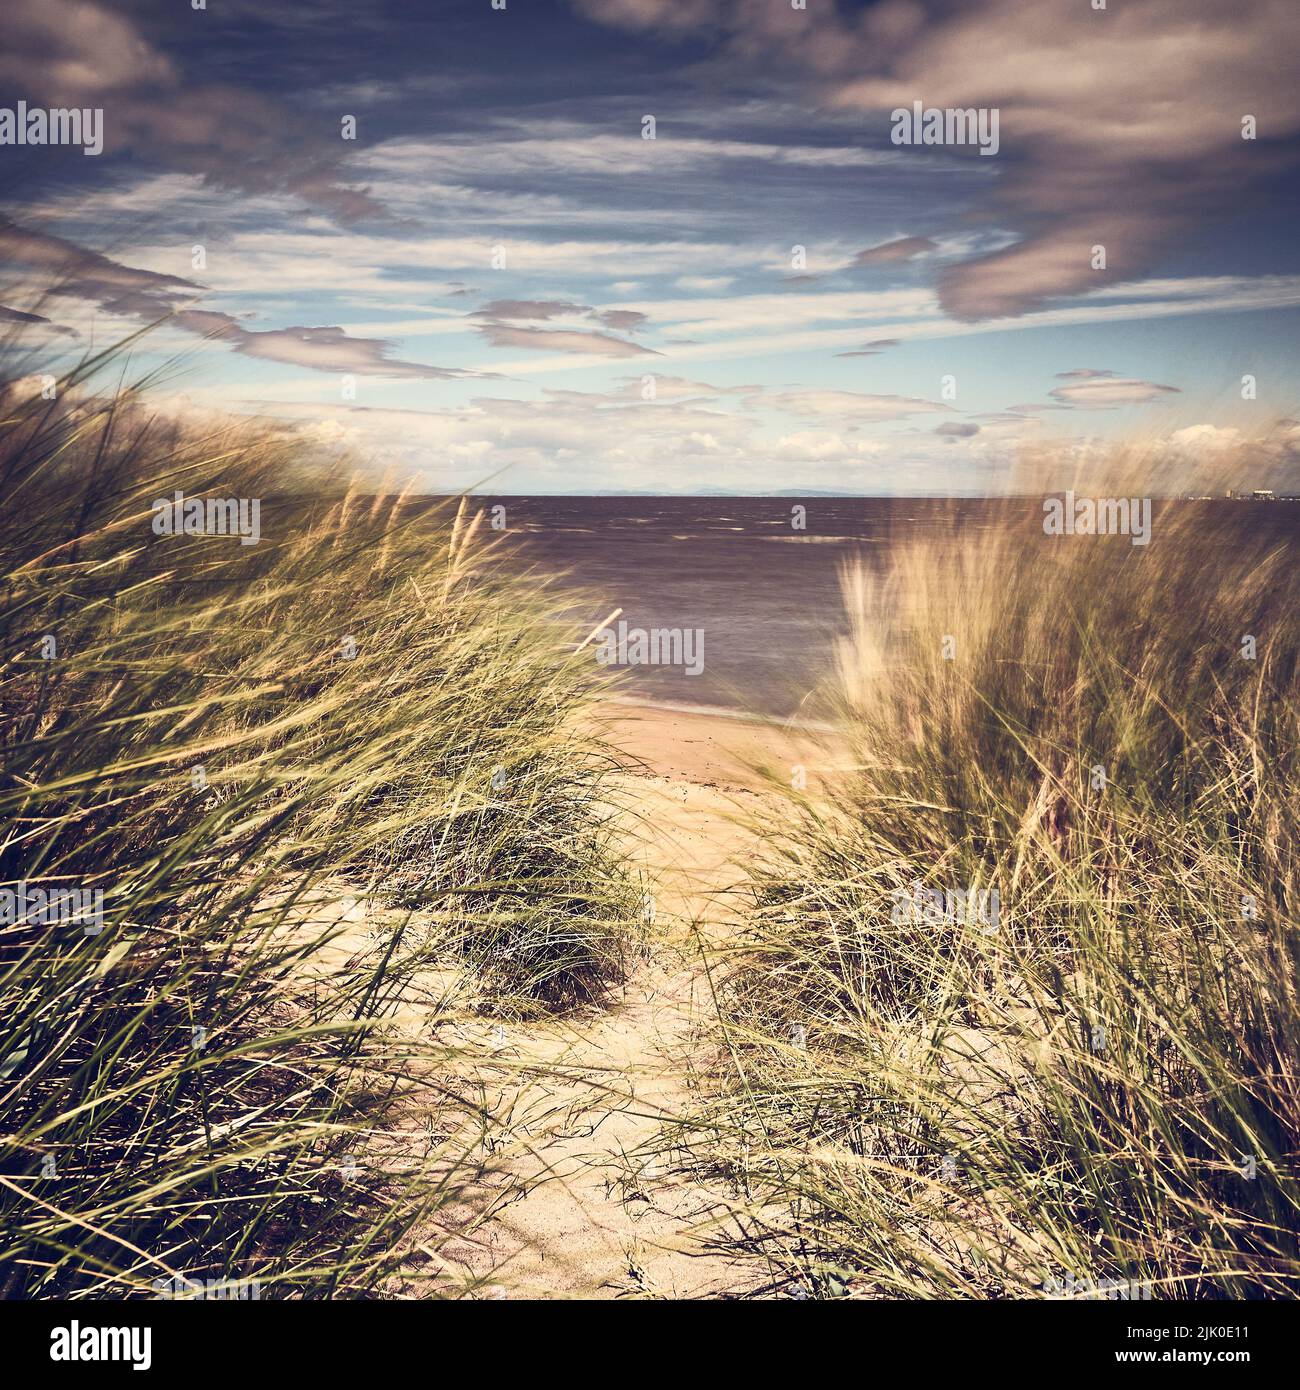 Marram grass on coastal sand dunes moving in the wind Stock Photo